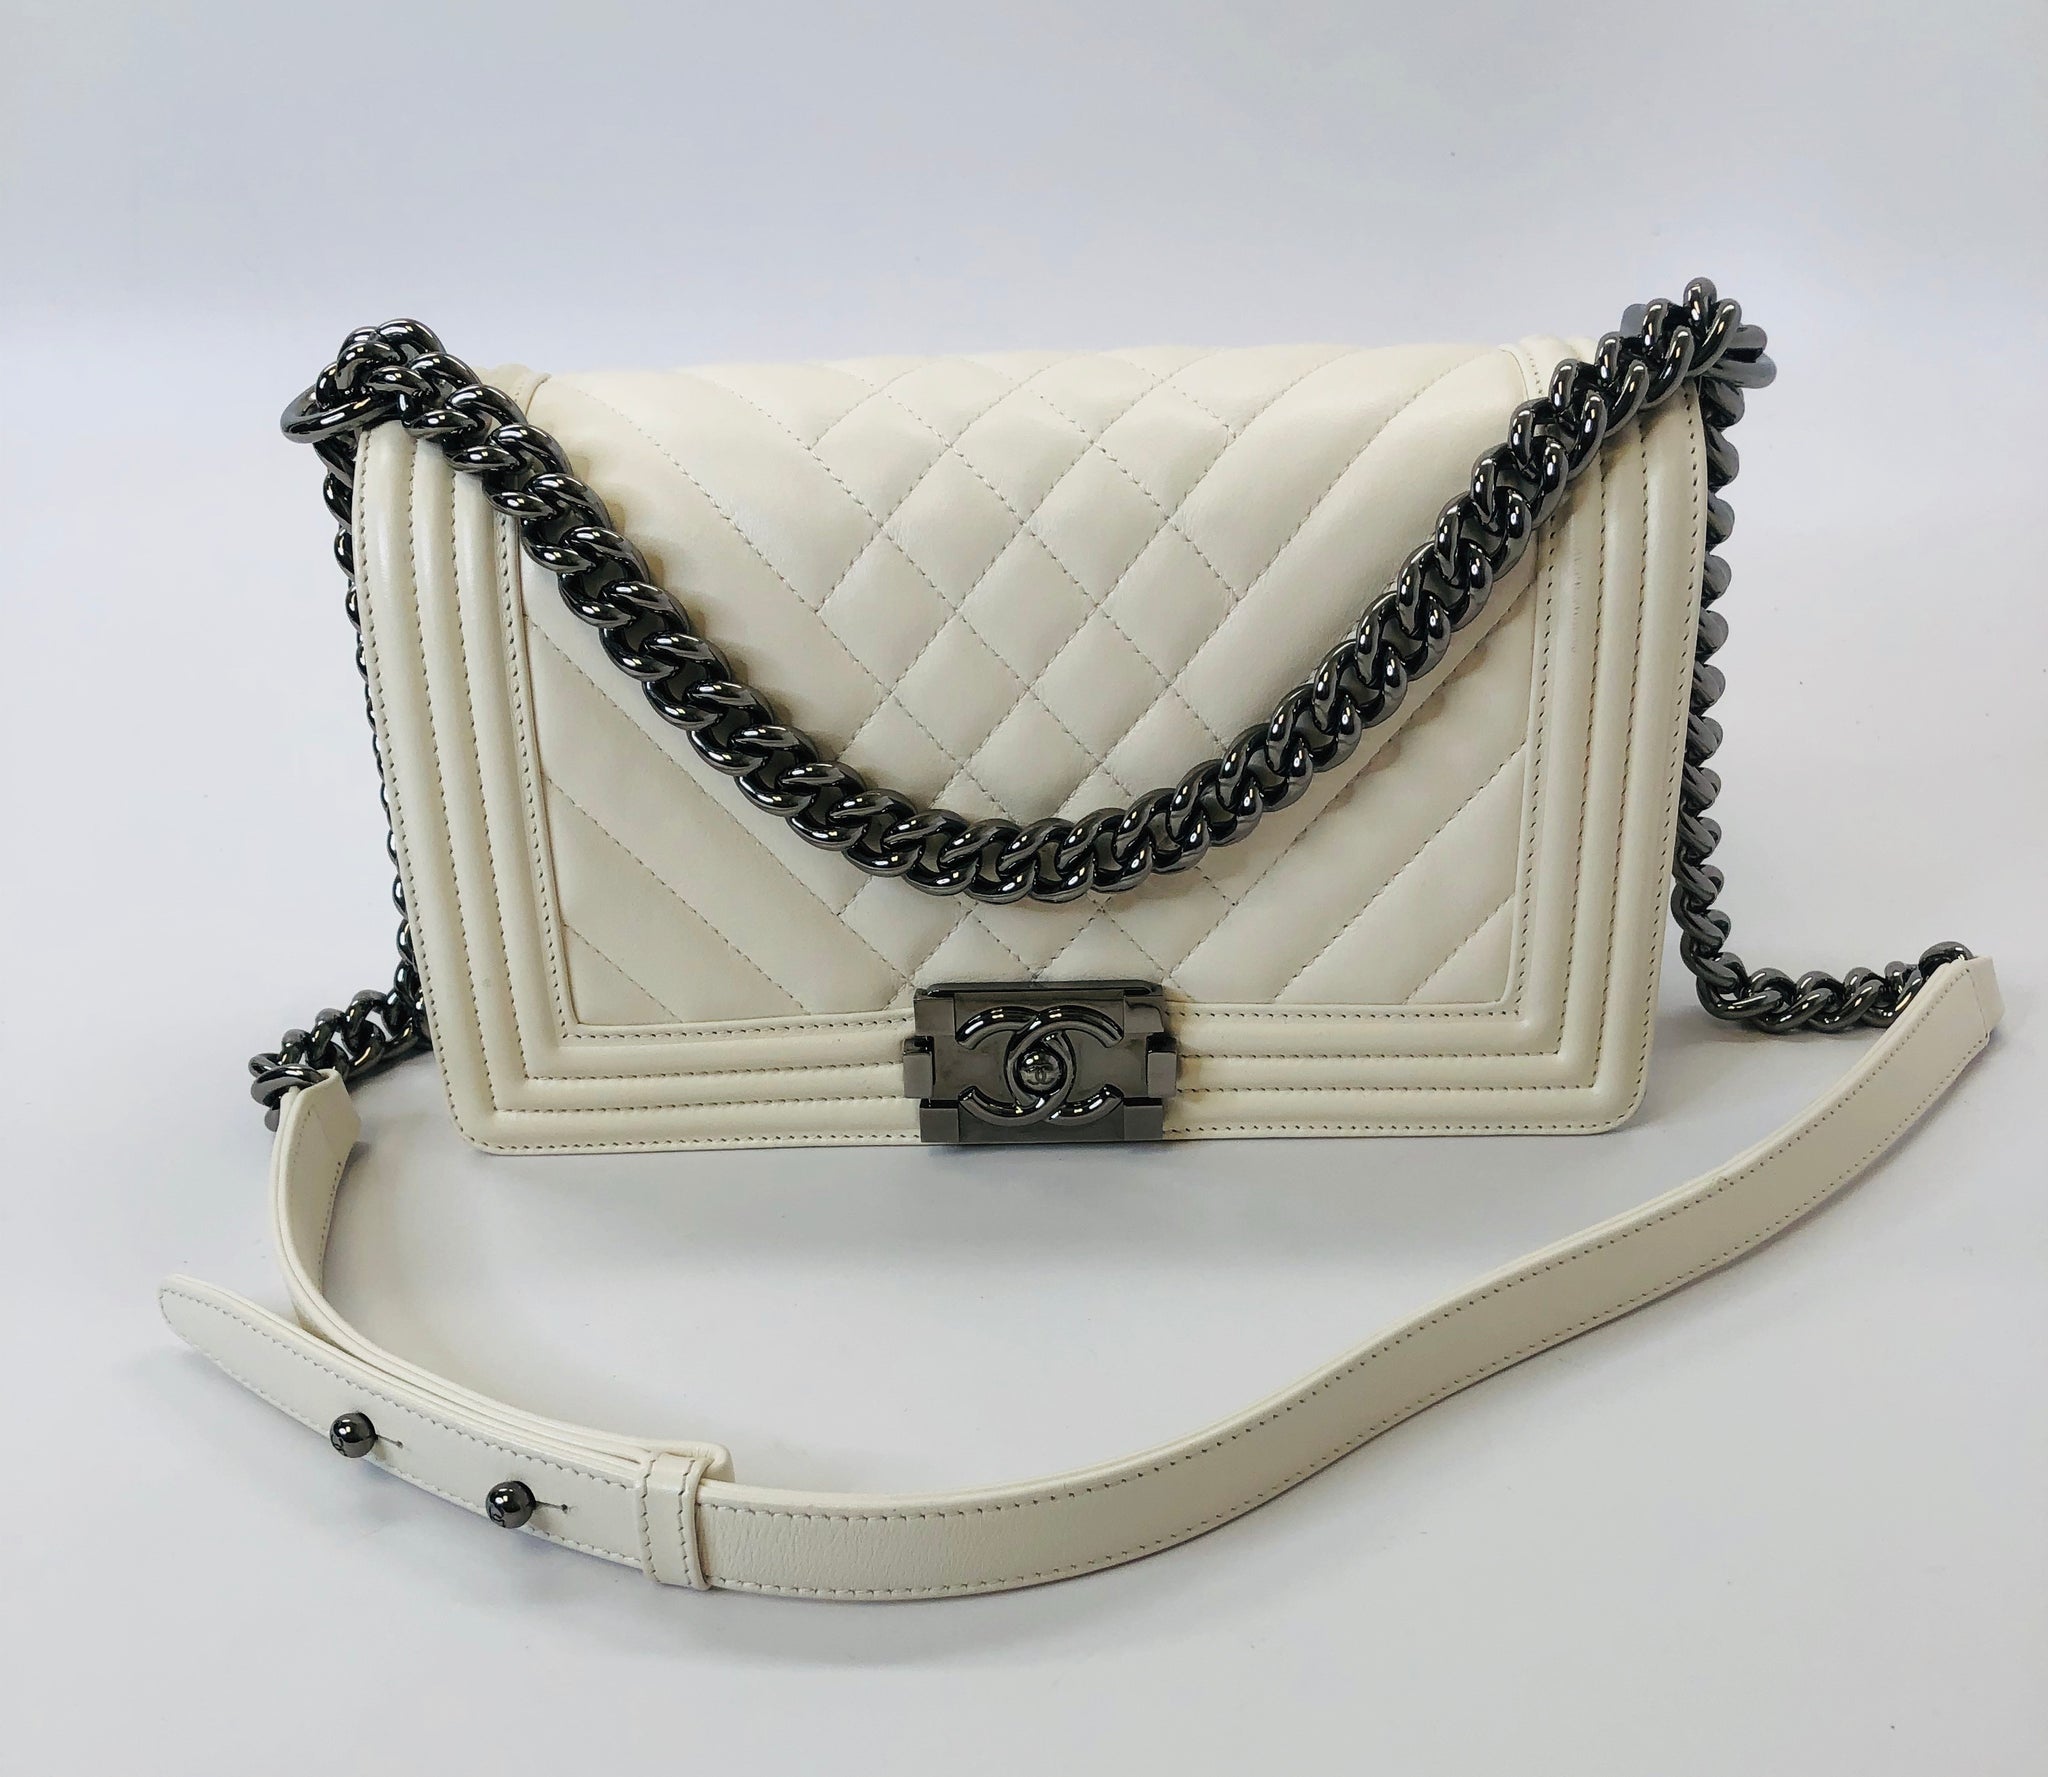 CHANEL White Quilted Calfskin and Silver Tone Metal Medium Boy Bag